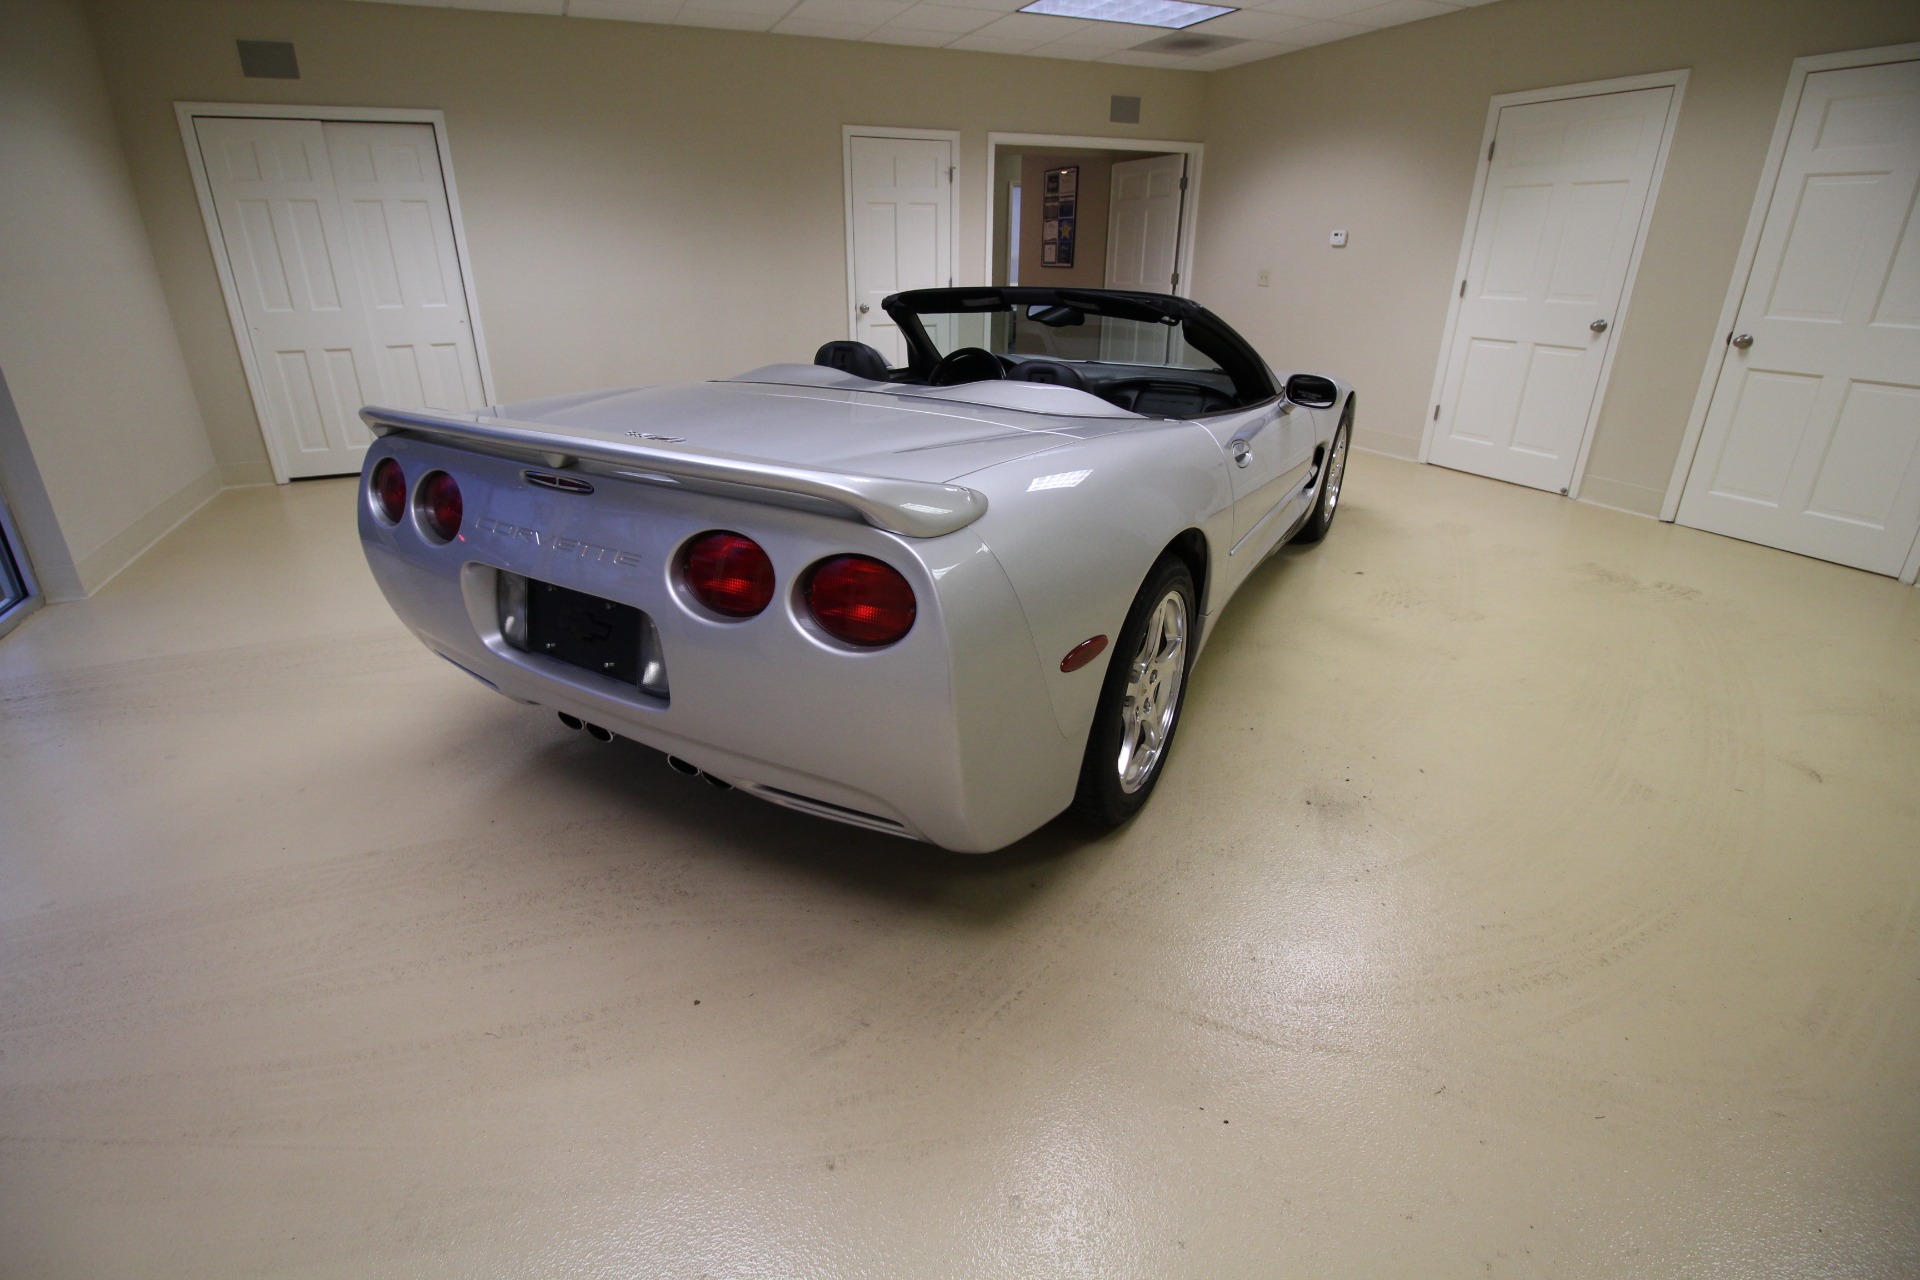 Used 2003 Quicksilver Metallic with Black Soft Top Chevrolet Corvette Convertible | Albany, NY